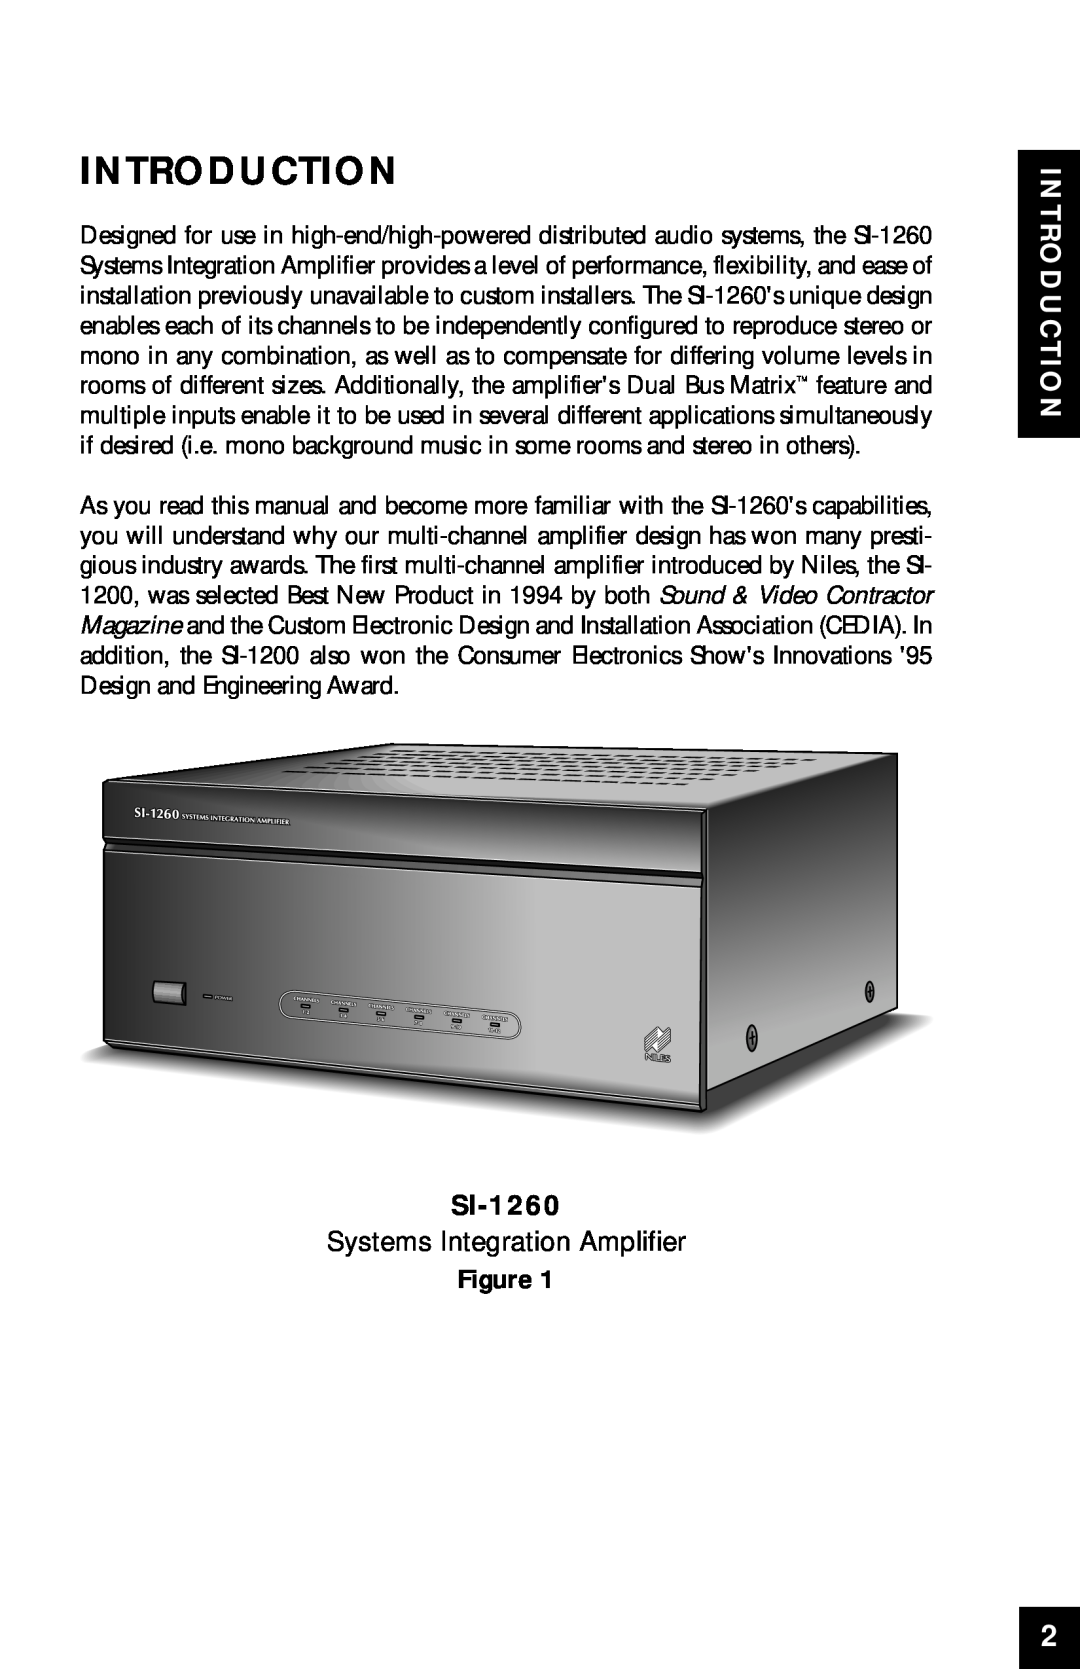 Niles Audio SI-1260 manual Introduction, Systems Integration Amplifier 